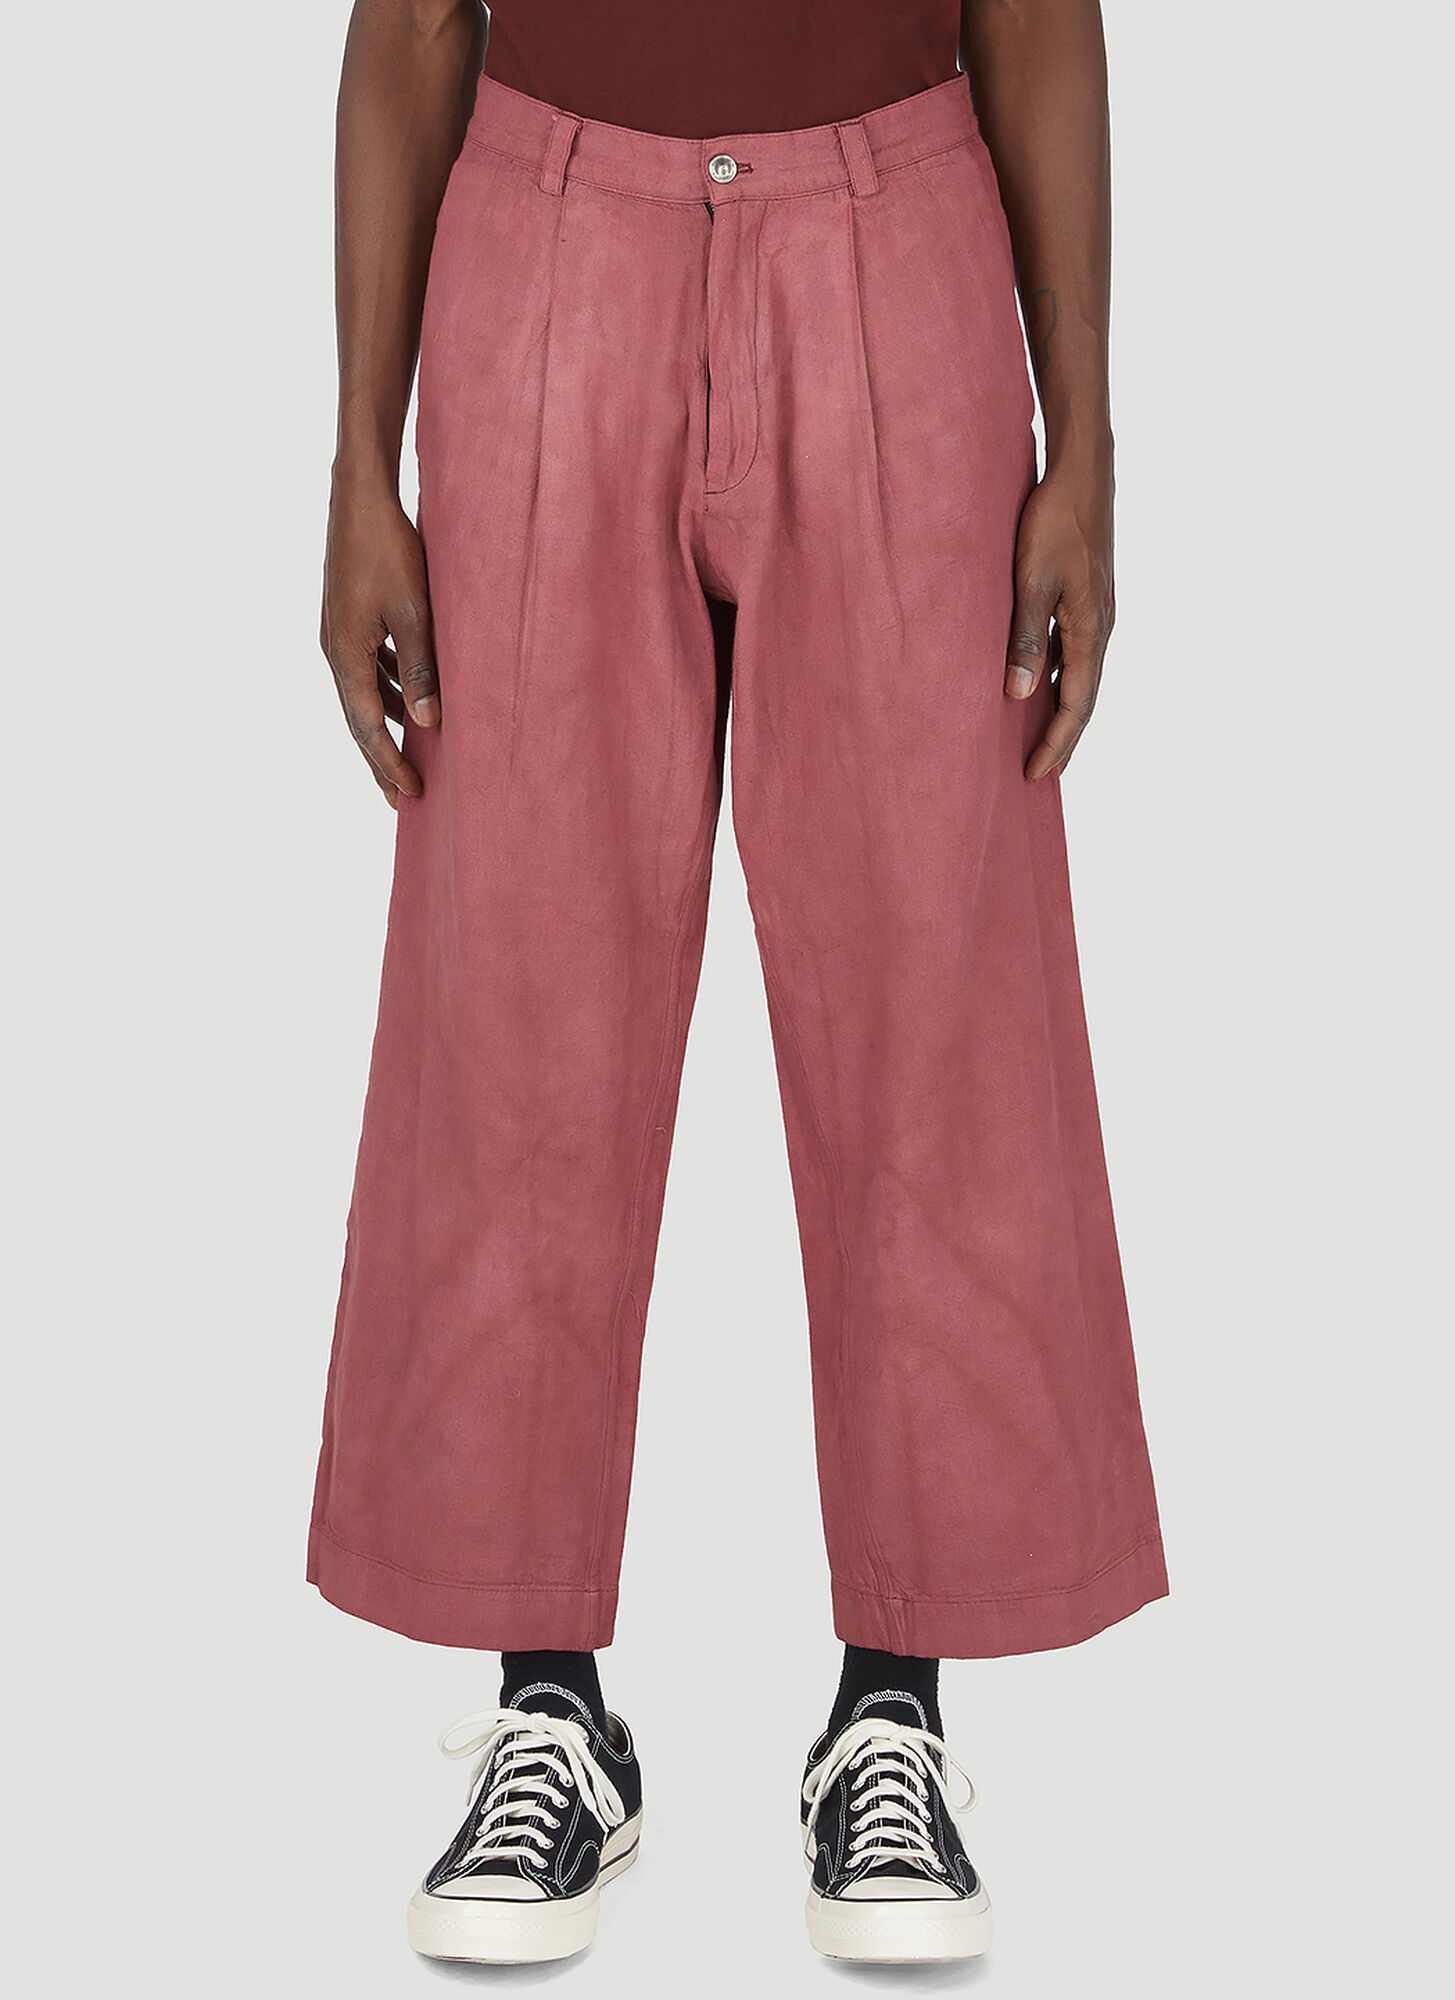 Alive & More Studio Dyed Trousers